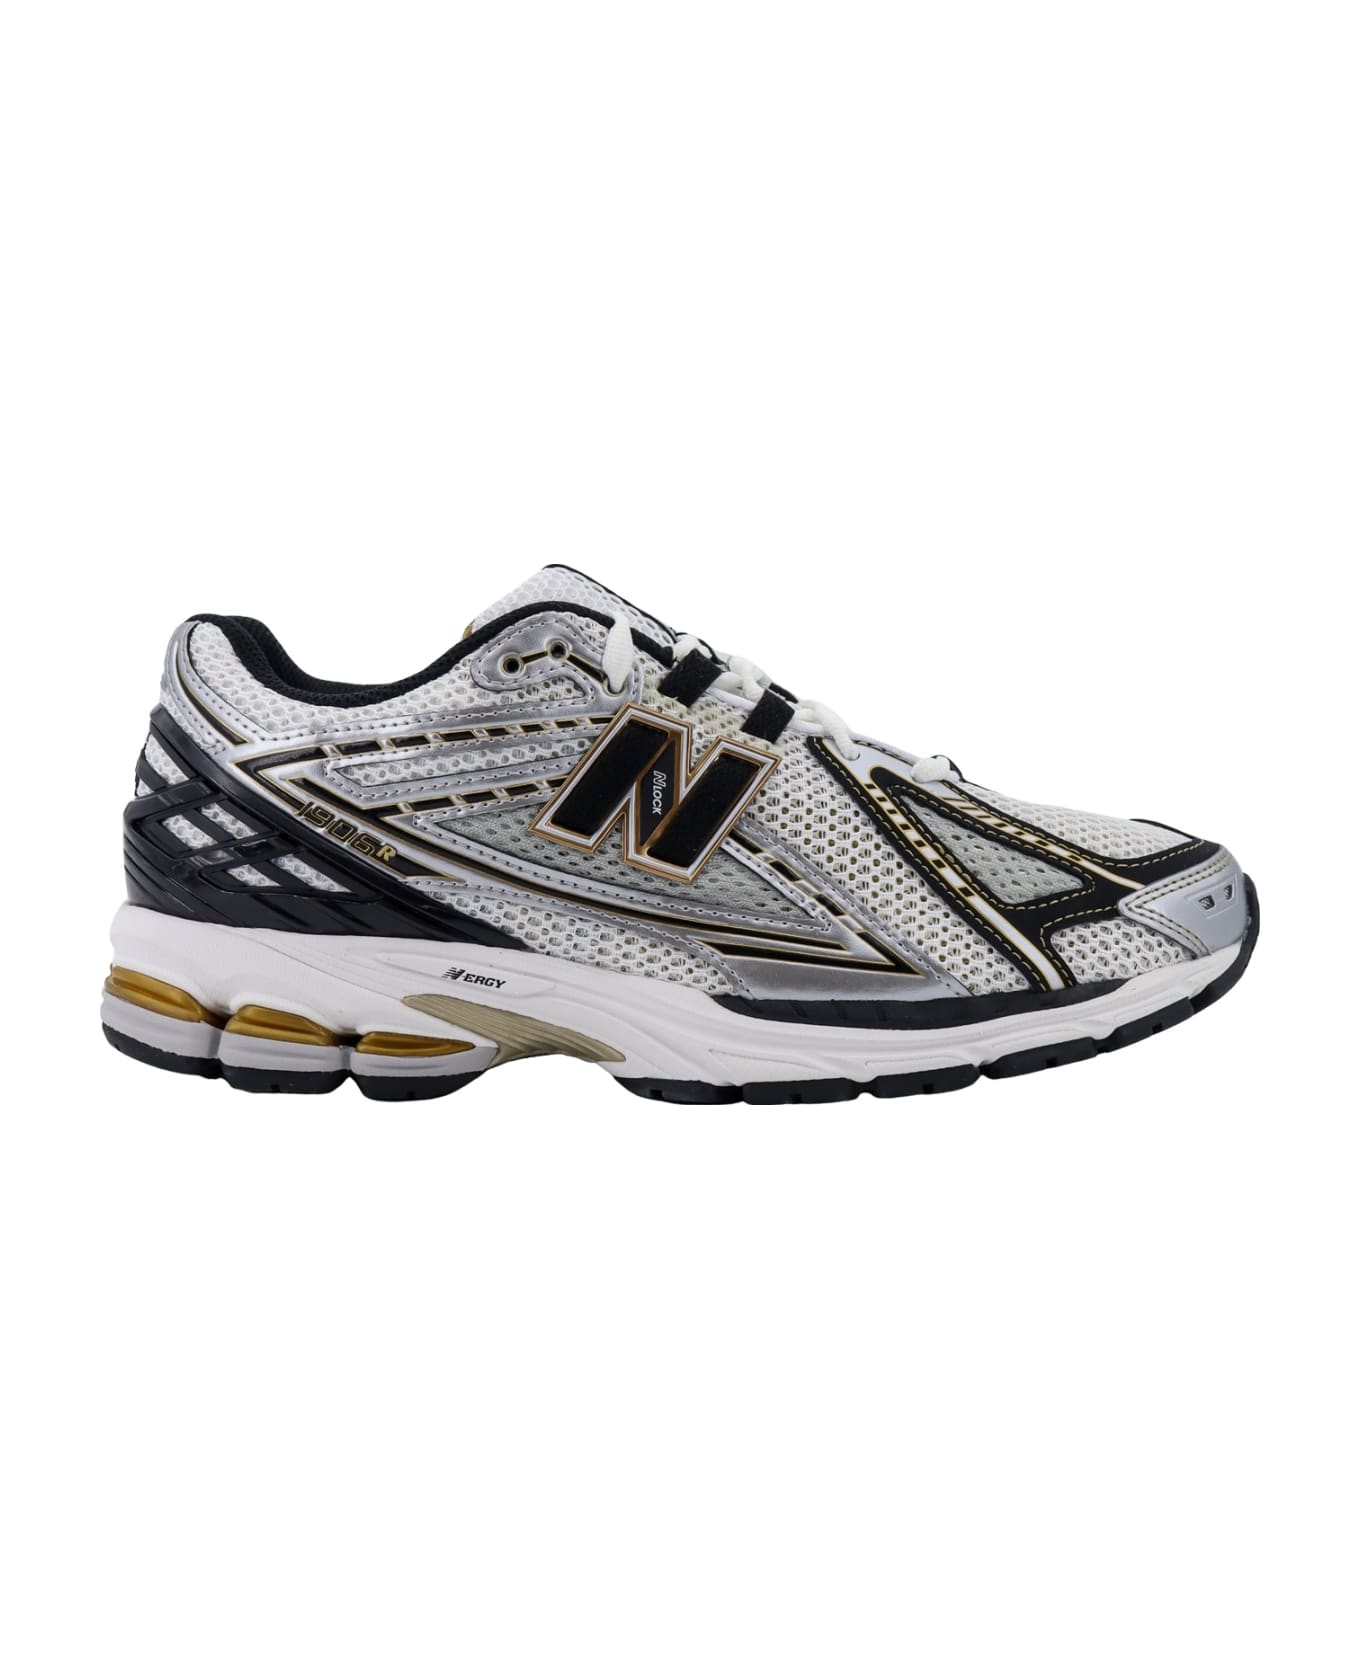 New Balance 1906 Sneakers - White Vintage Gold スニーカー